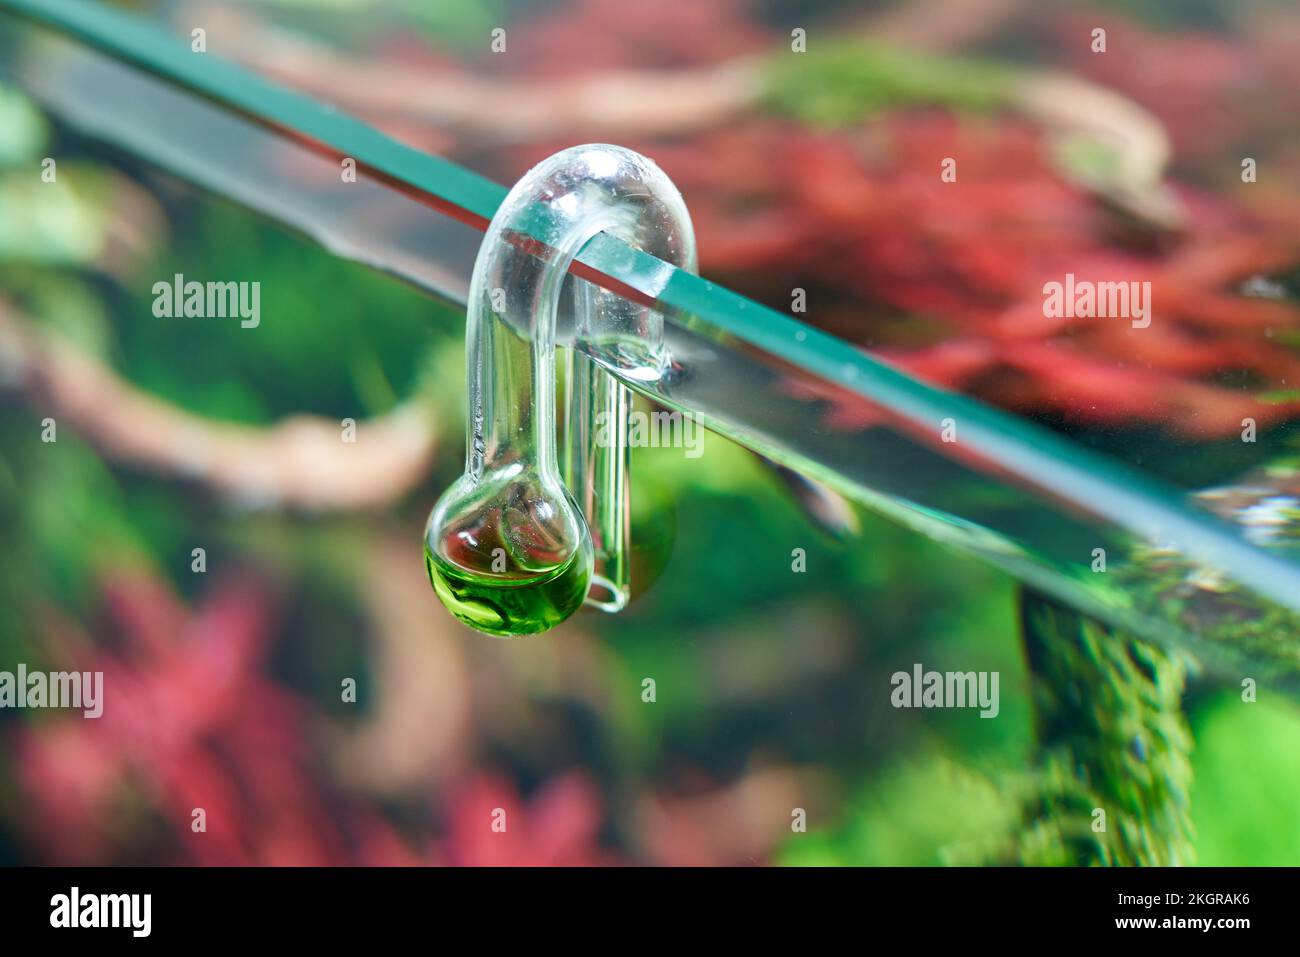 Glass hang-on CO2 aquarium drop checker for monitoring optimal carbon dioxide amount in planted tank. Stock Photo